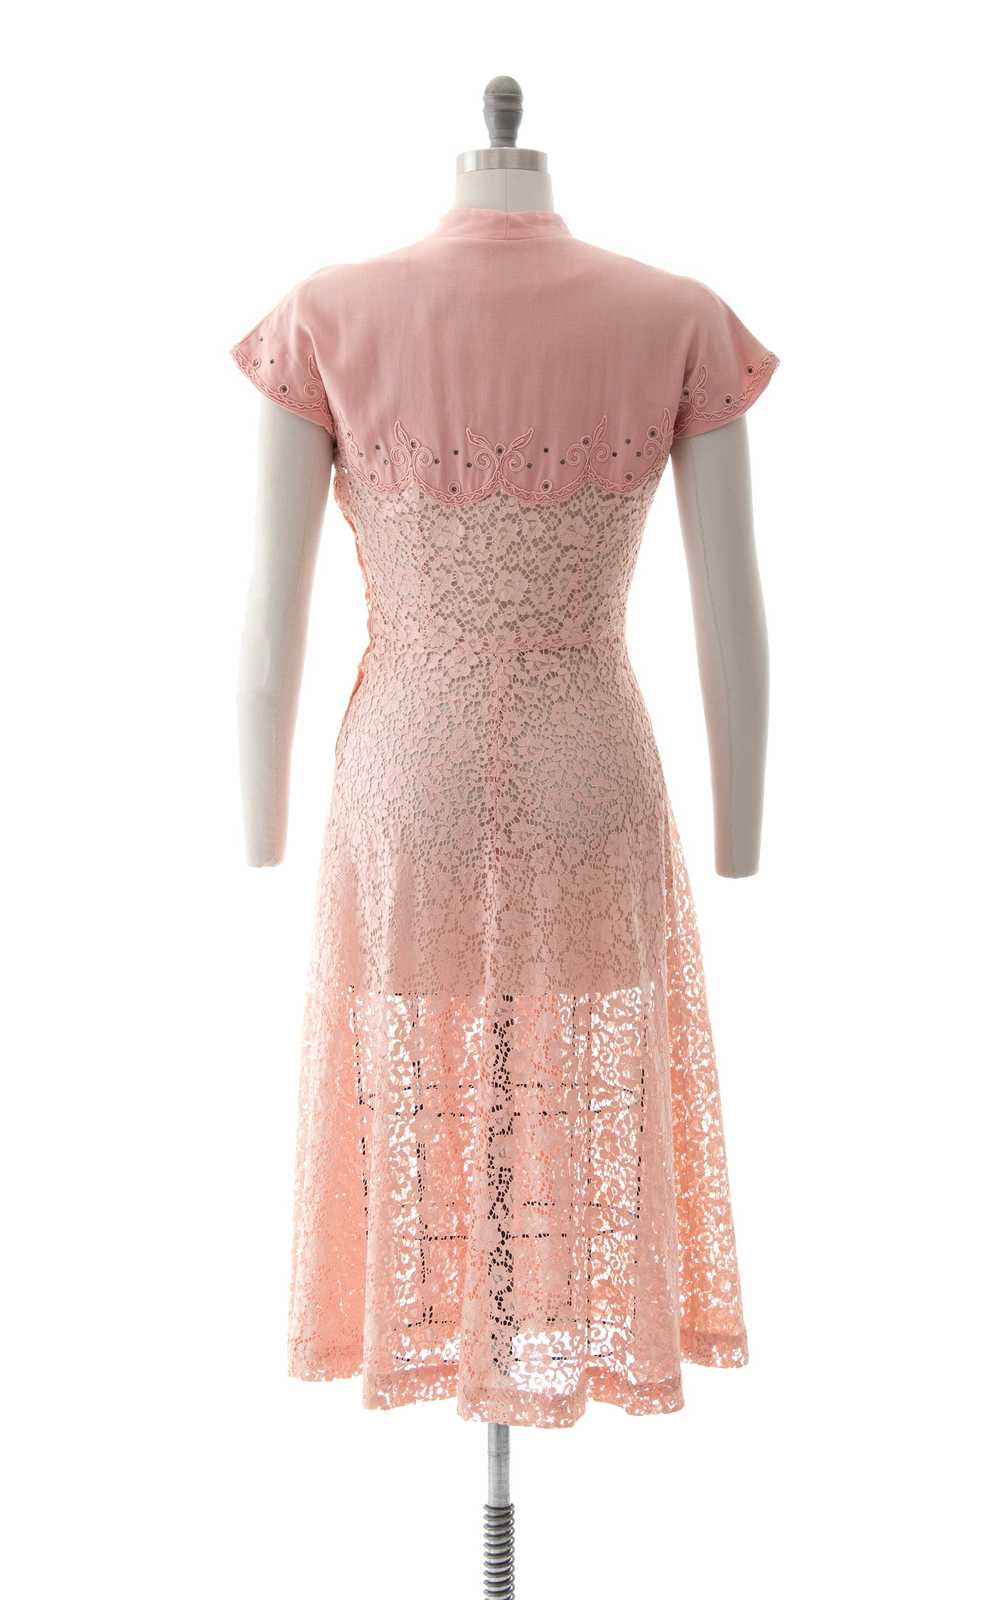 NEW ARRIVAL || 1950s Linen & Lace Dress | small - image 4